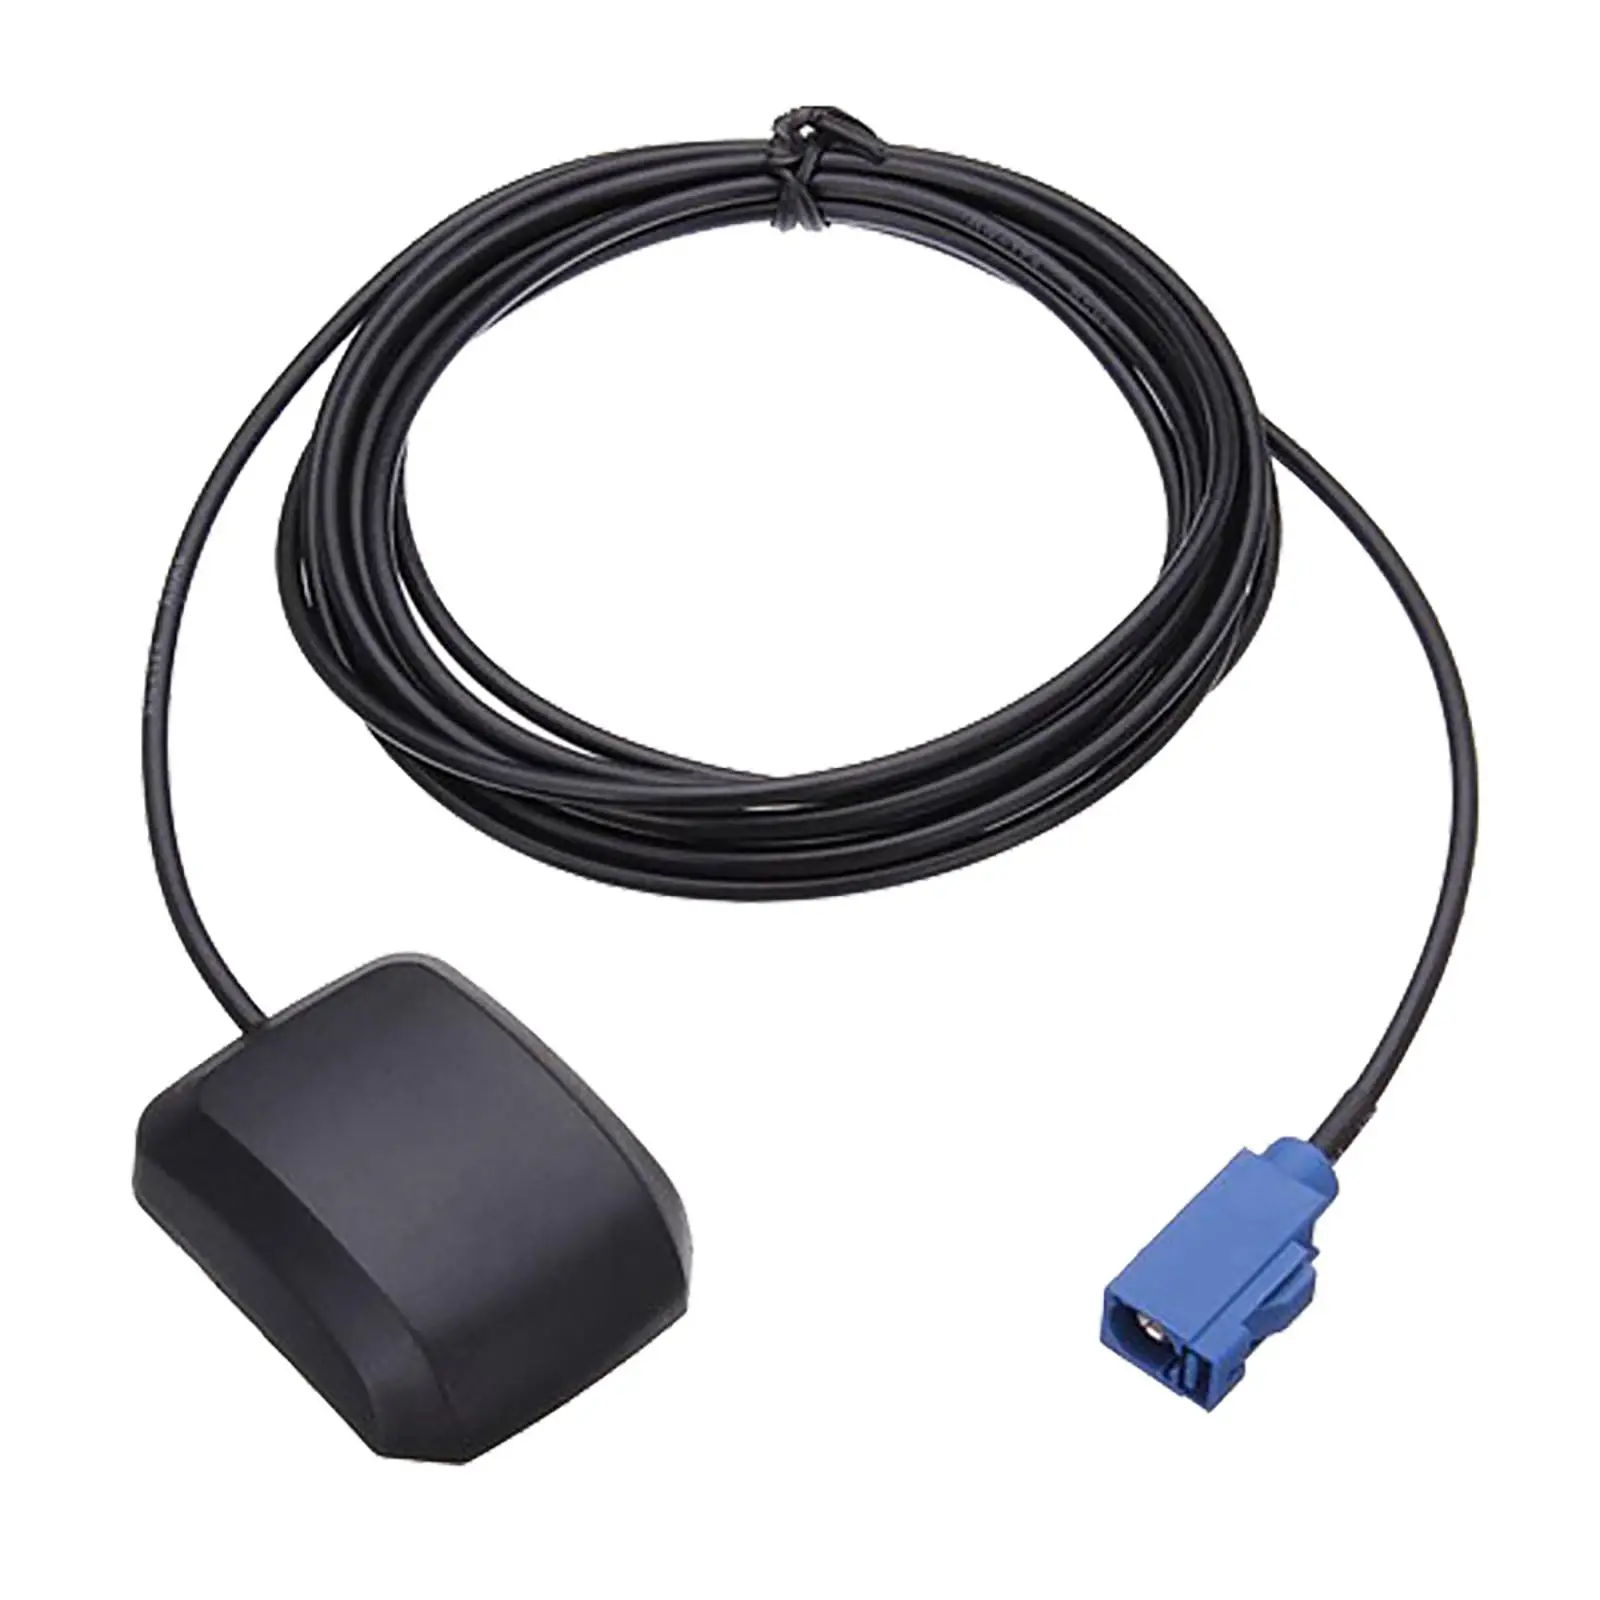 Vehicle Active Navigation with Male Connector for Car Stereo